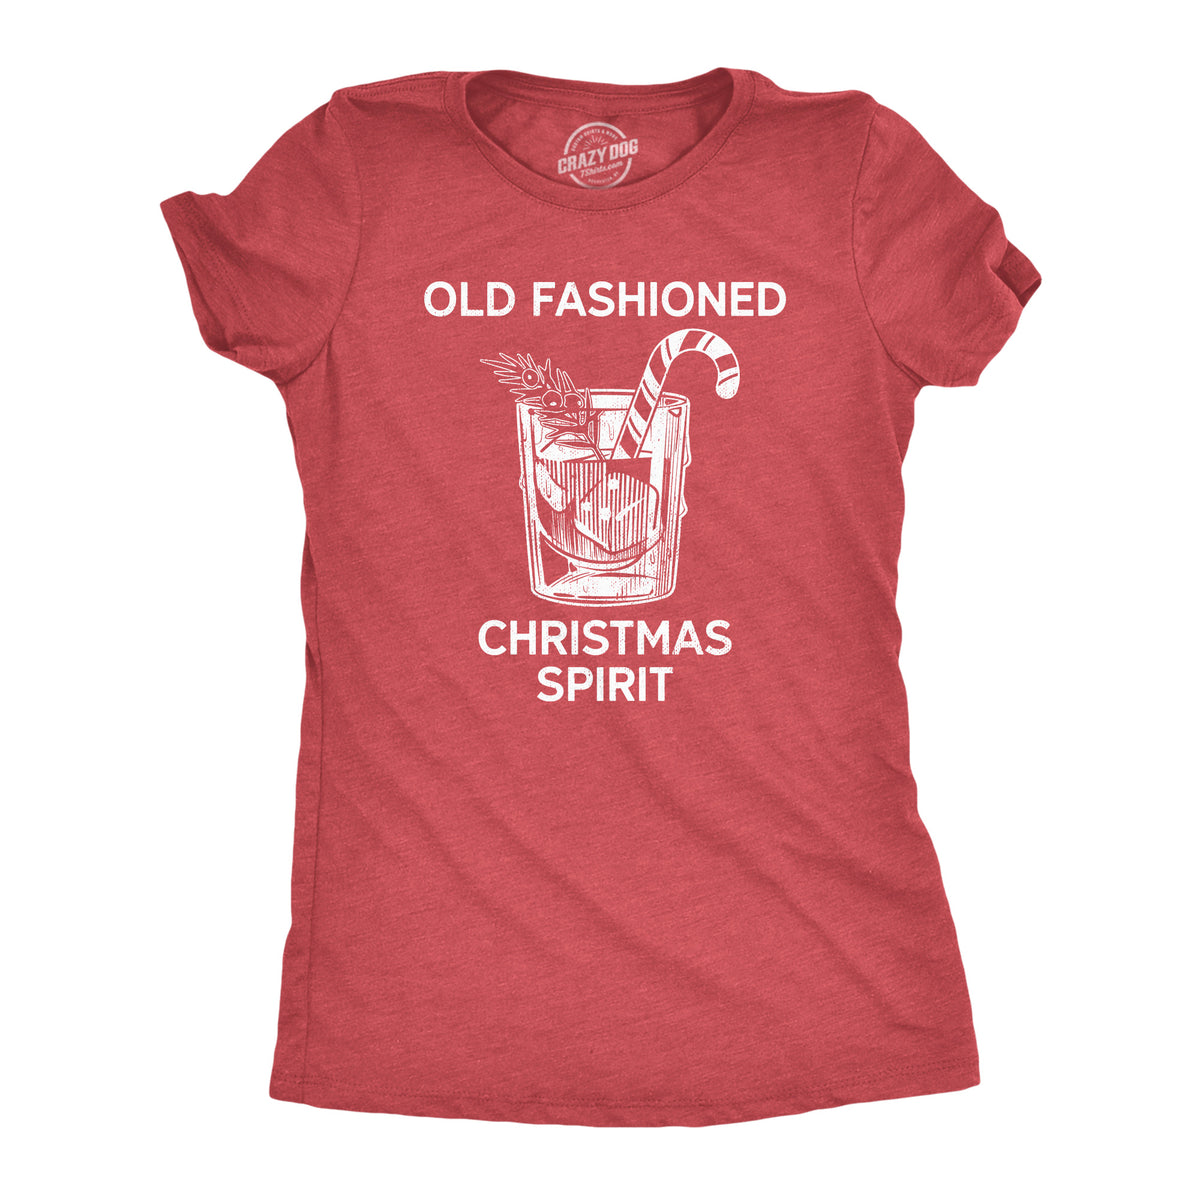 Funny Heather Red - SPIRIT Old Fashioned Christmas Spirit Womens T Shirt Nerdy Christmas Drinking Tee